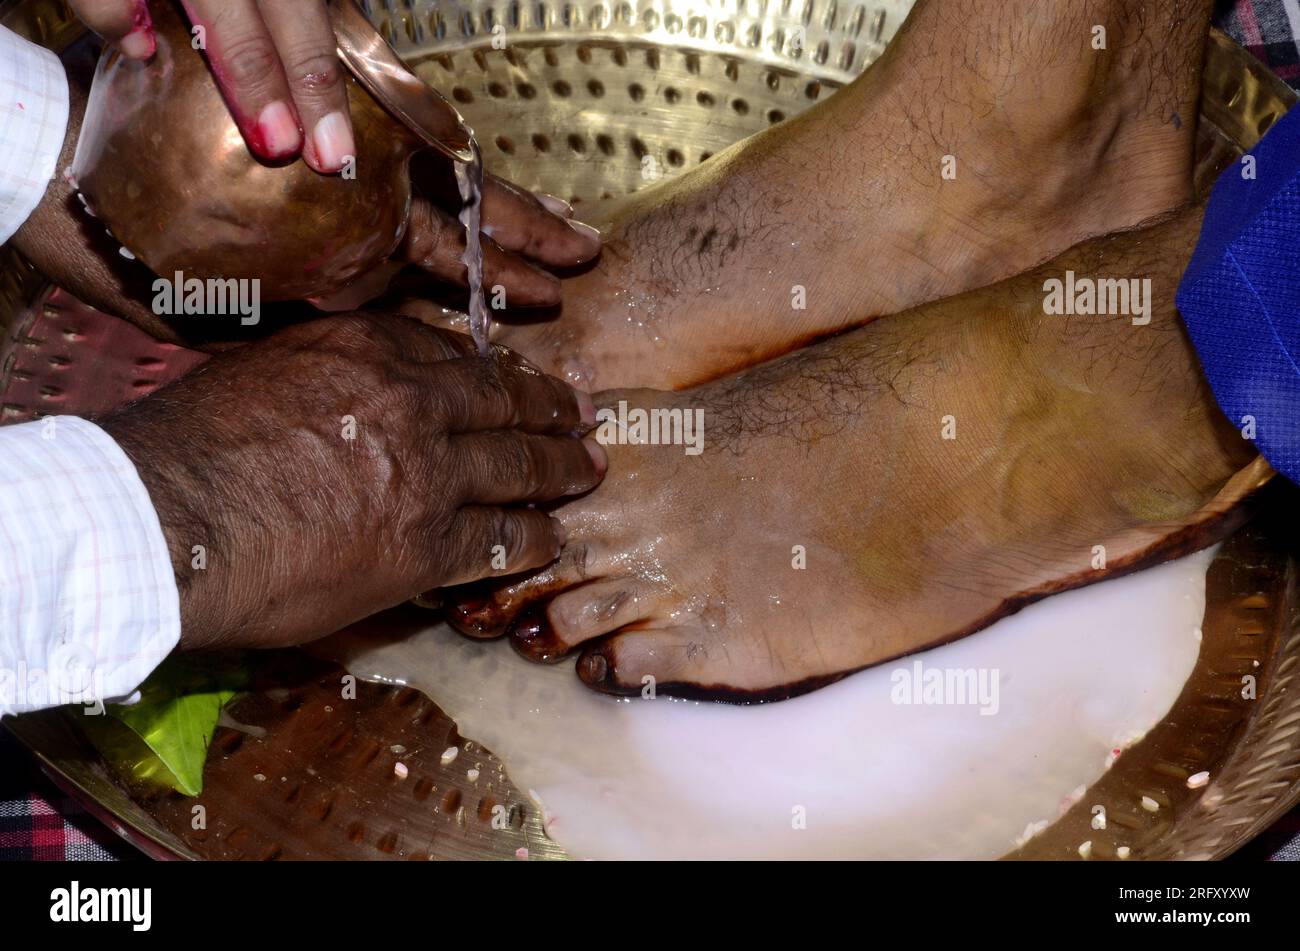 Photograph of a Hindu groom washing feet during a traditional wedding ceremony Stock Photo